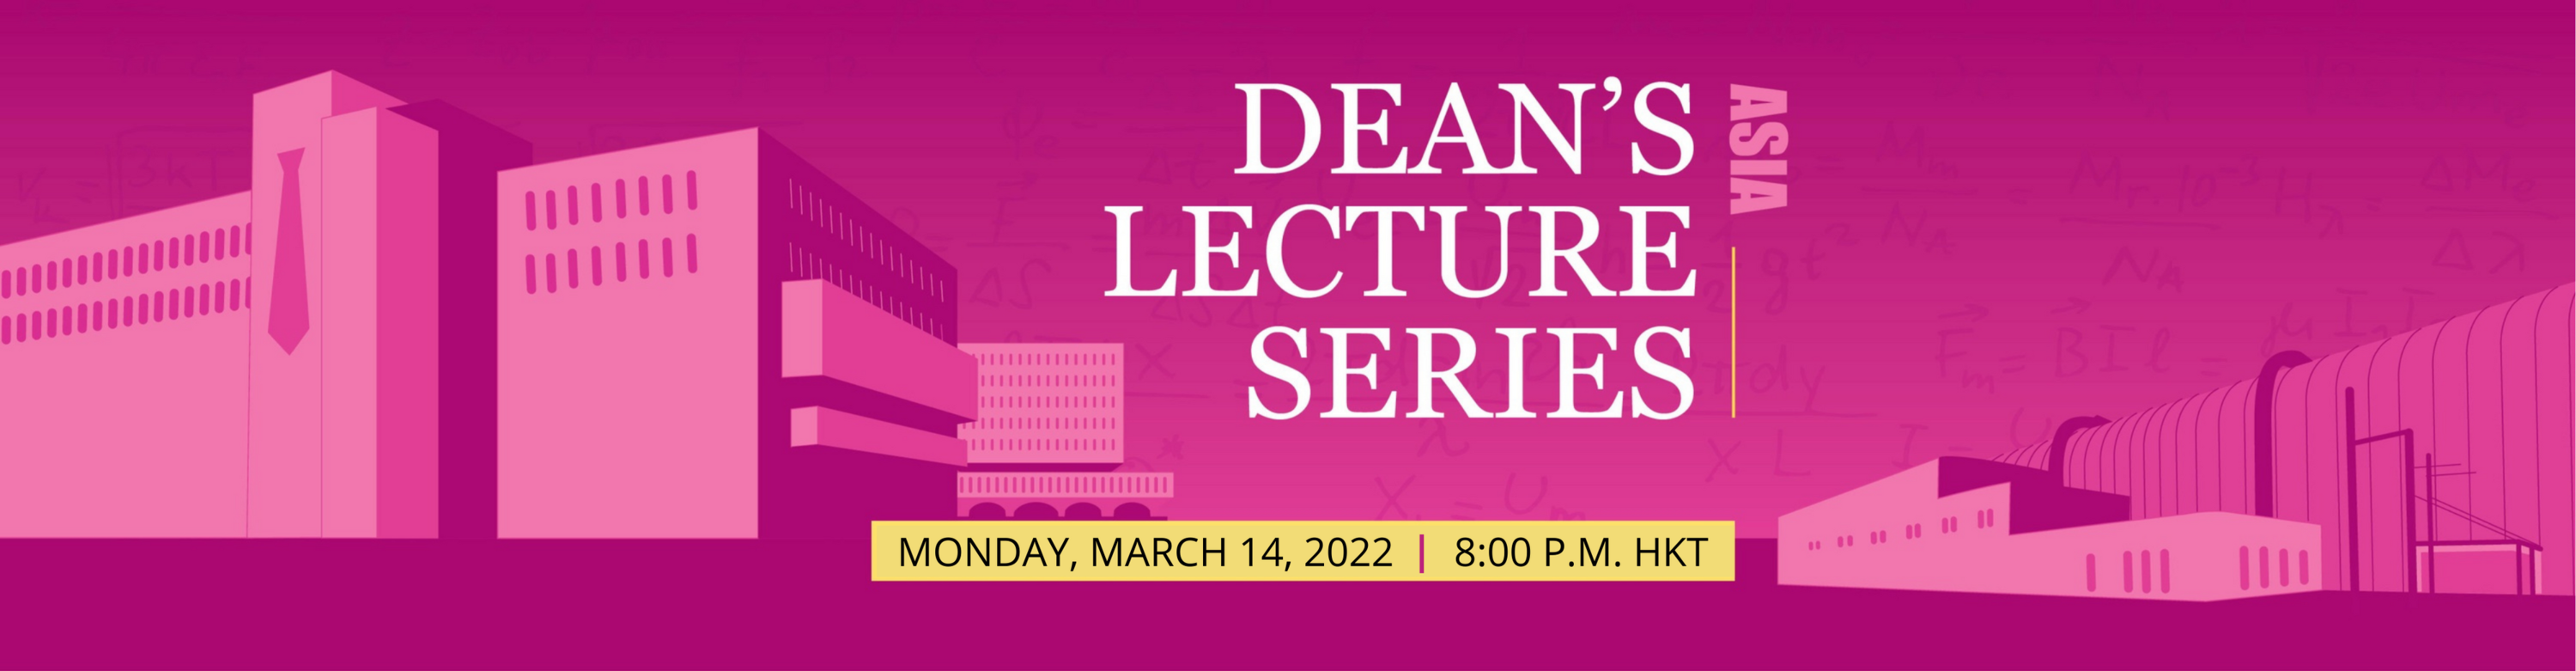 Dean's Lecture Series Banner in Pink